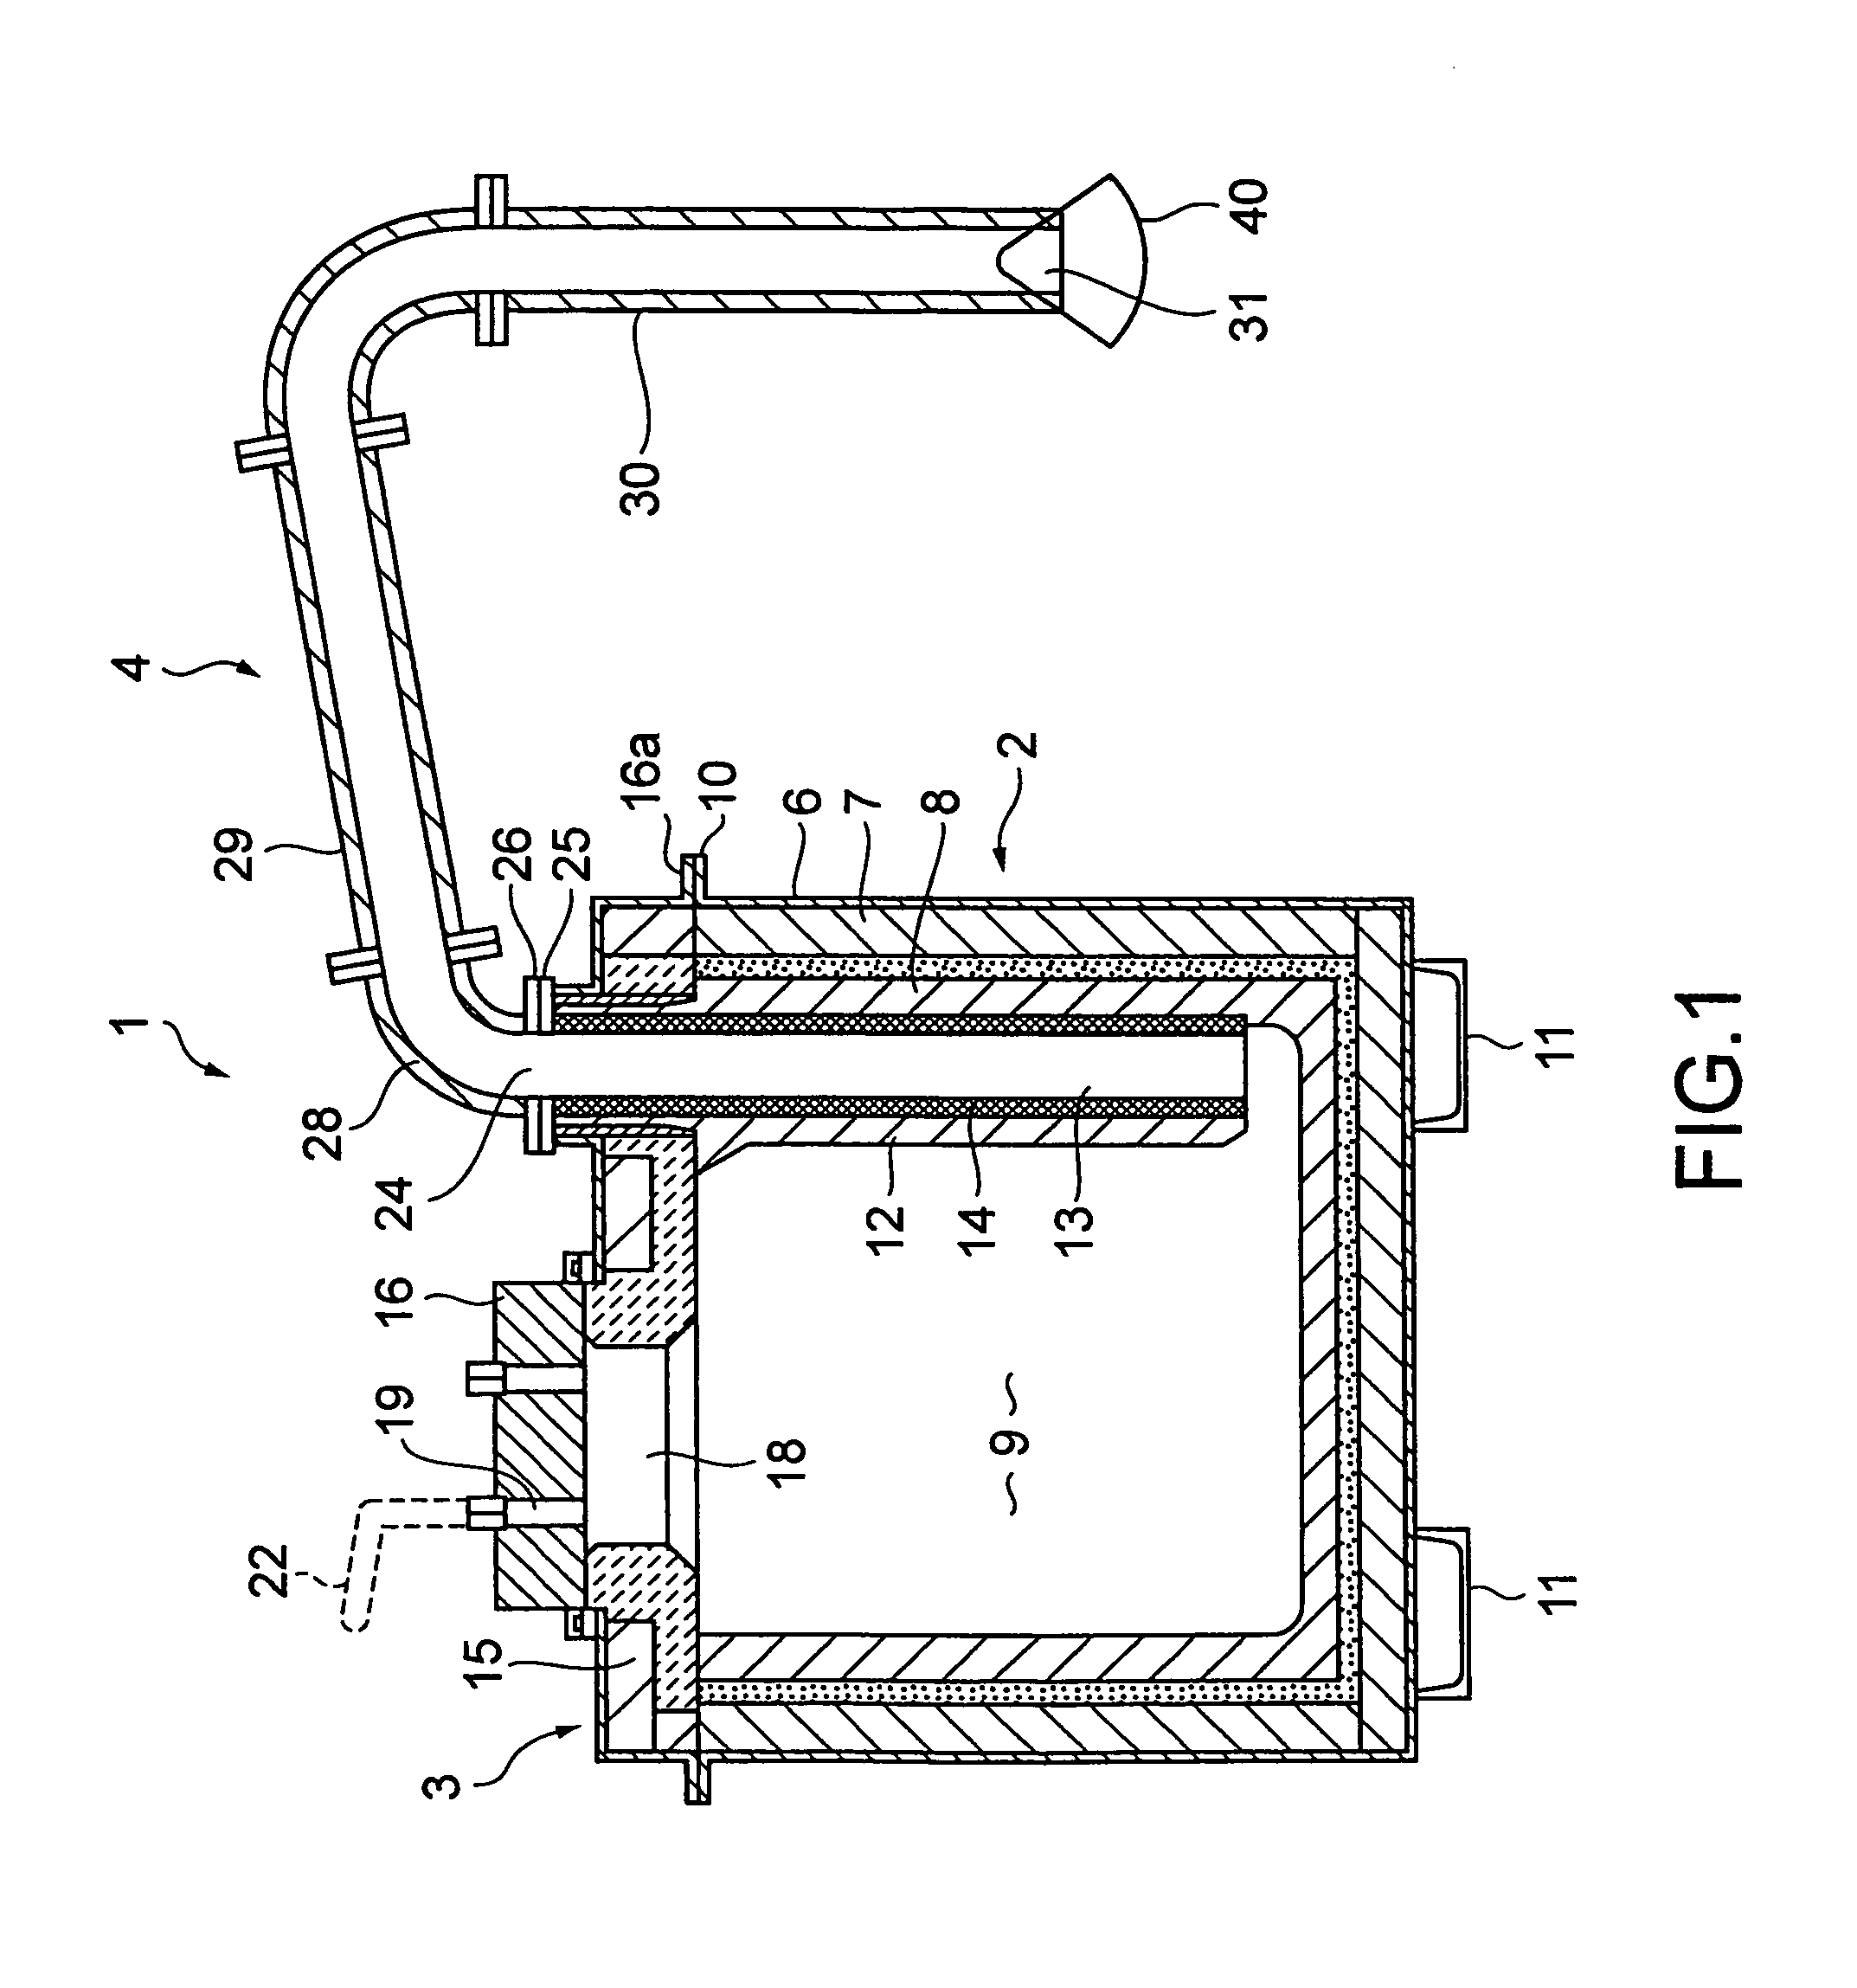 System for supplying molten metal, container and a vehicle